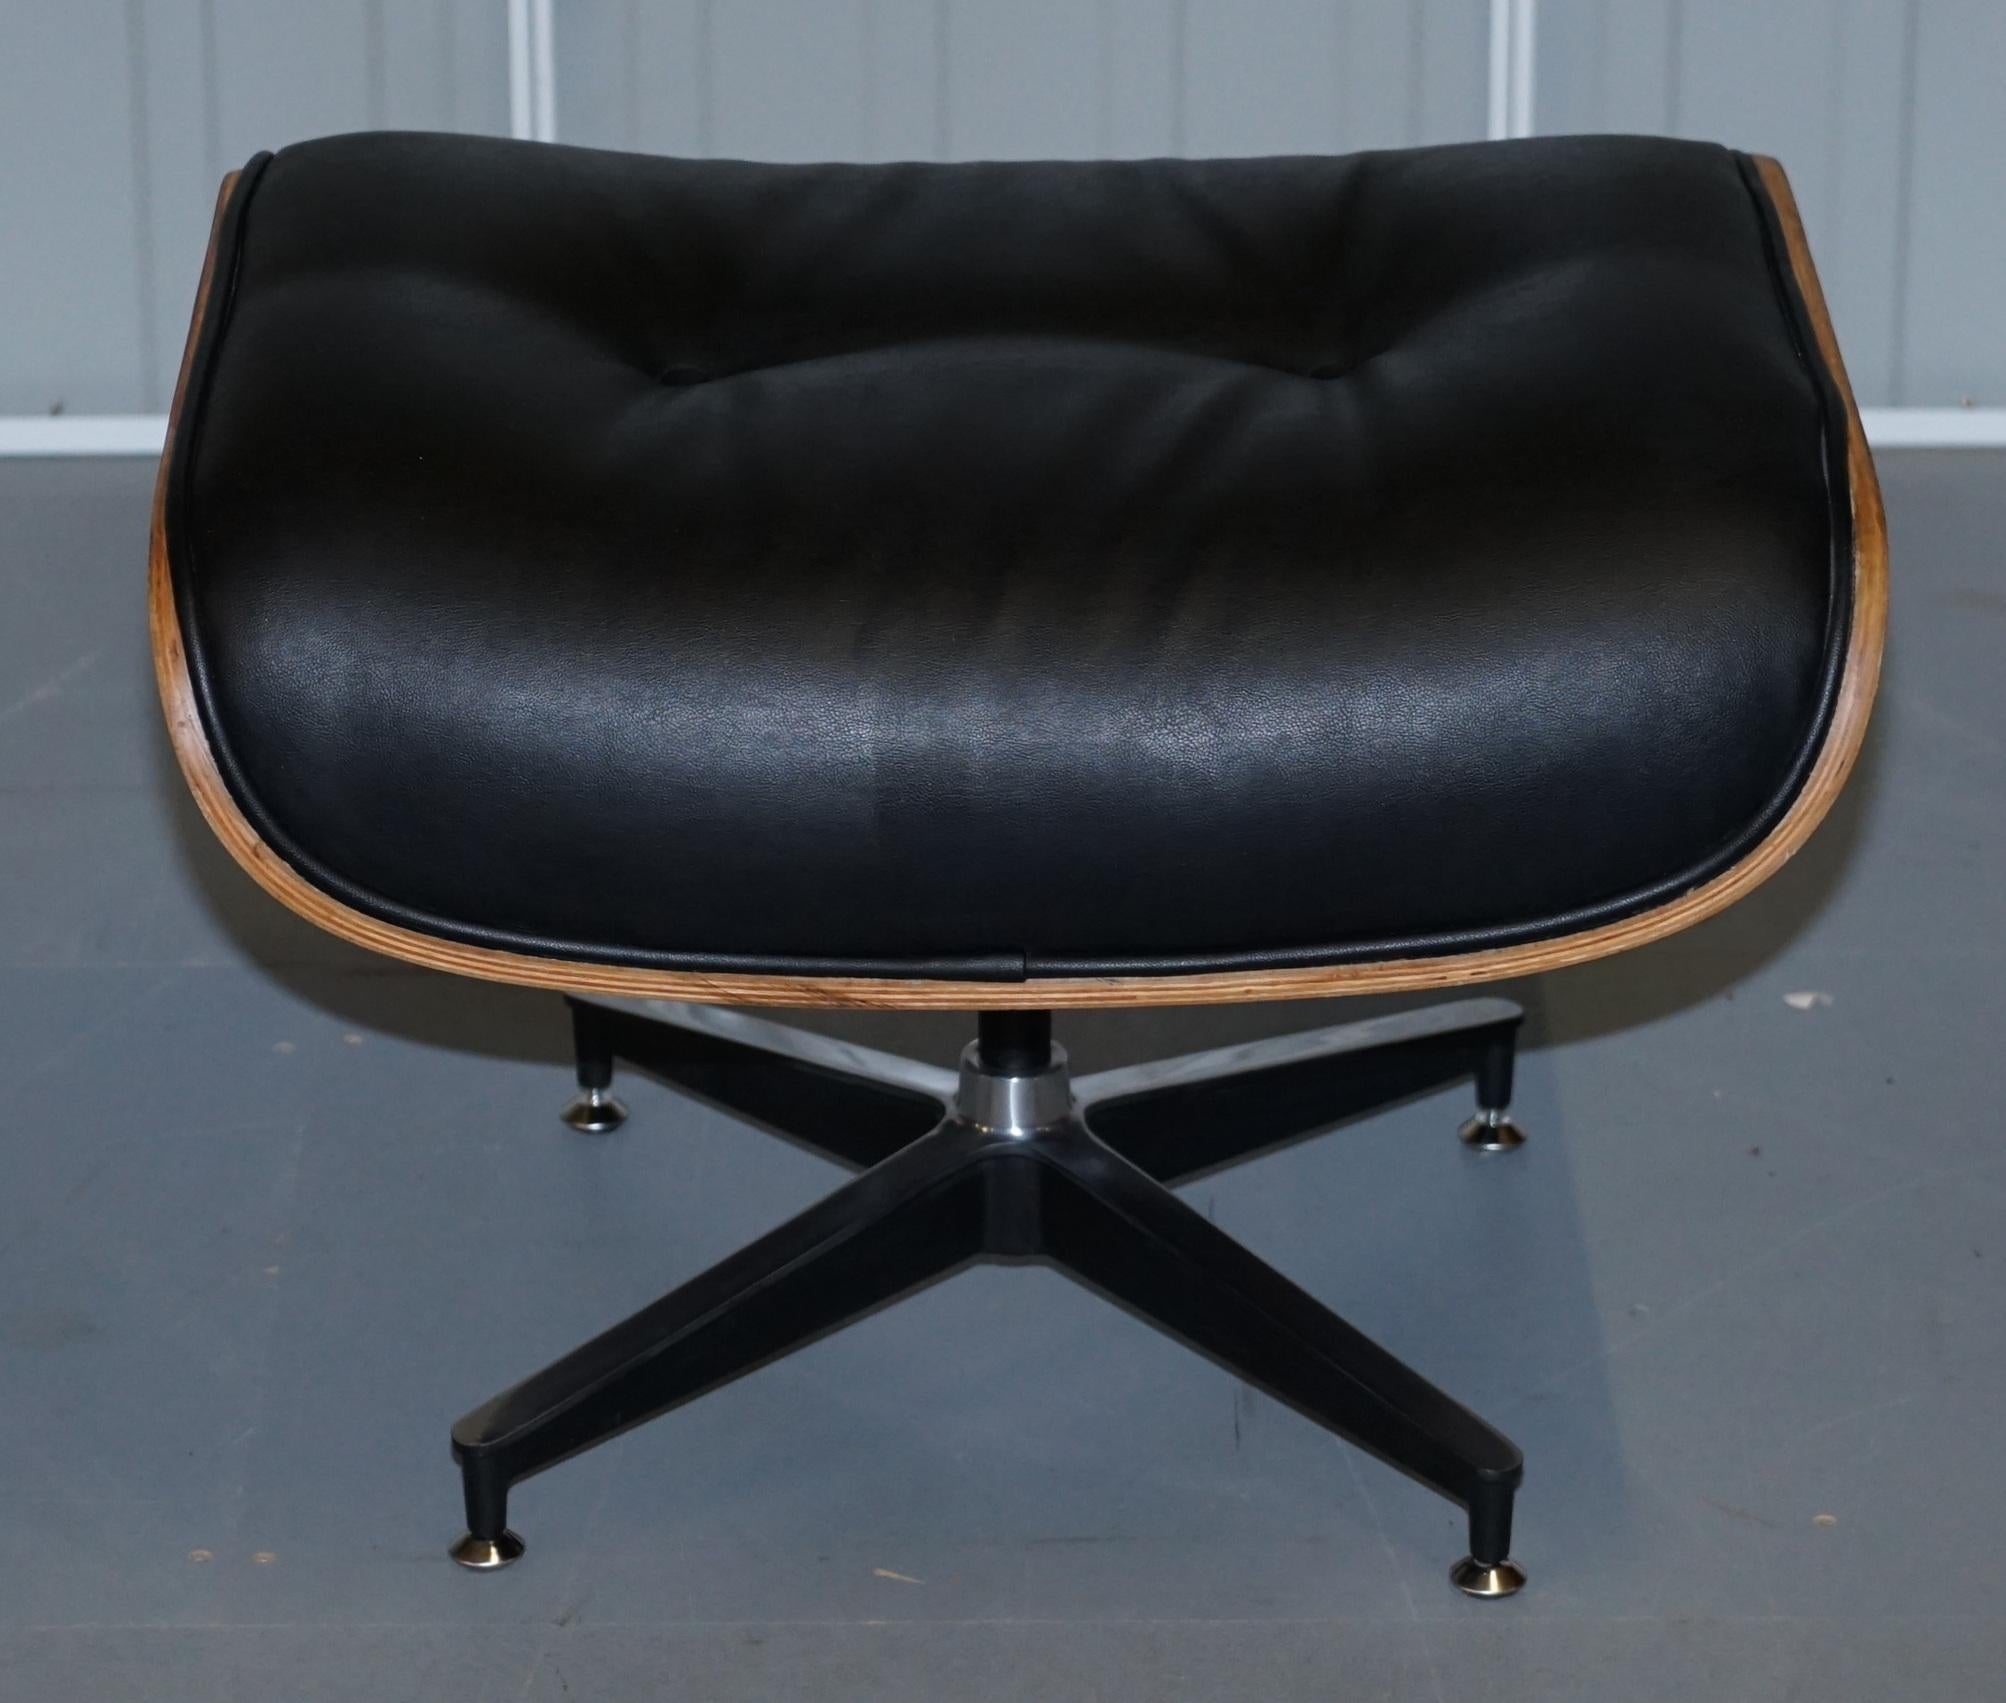 We are delighted to offer for auction this nice black leather footstool with hardwood veneer frame and chrome base ottoman footstool

To be used with lounge chairs, its been floating around my warehouse for years as we had lost the bolts that fit